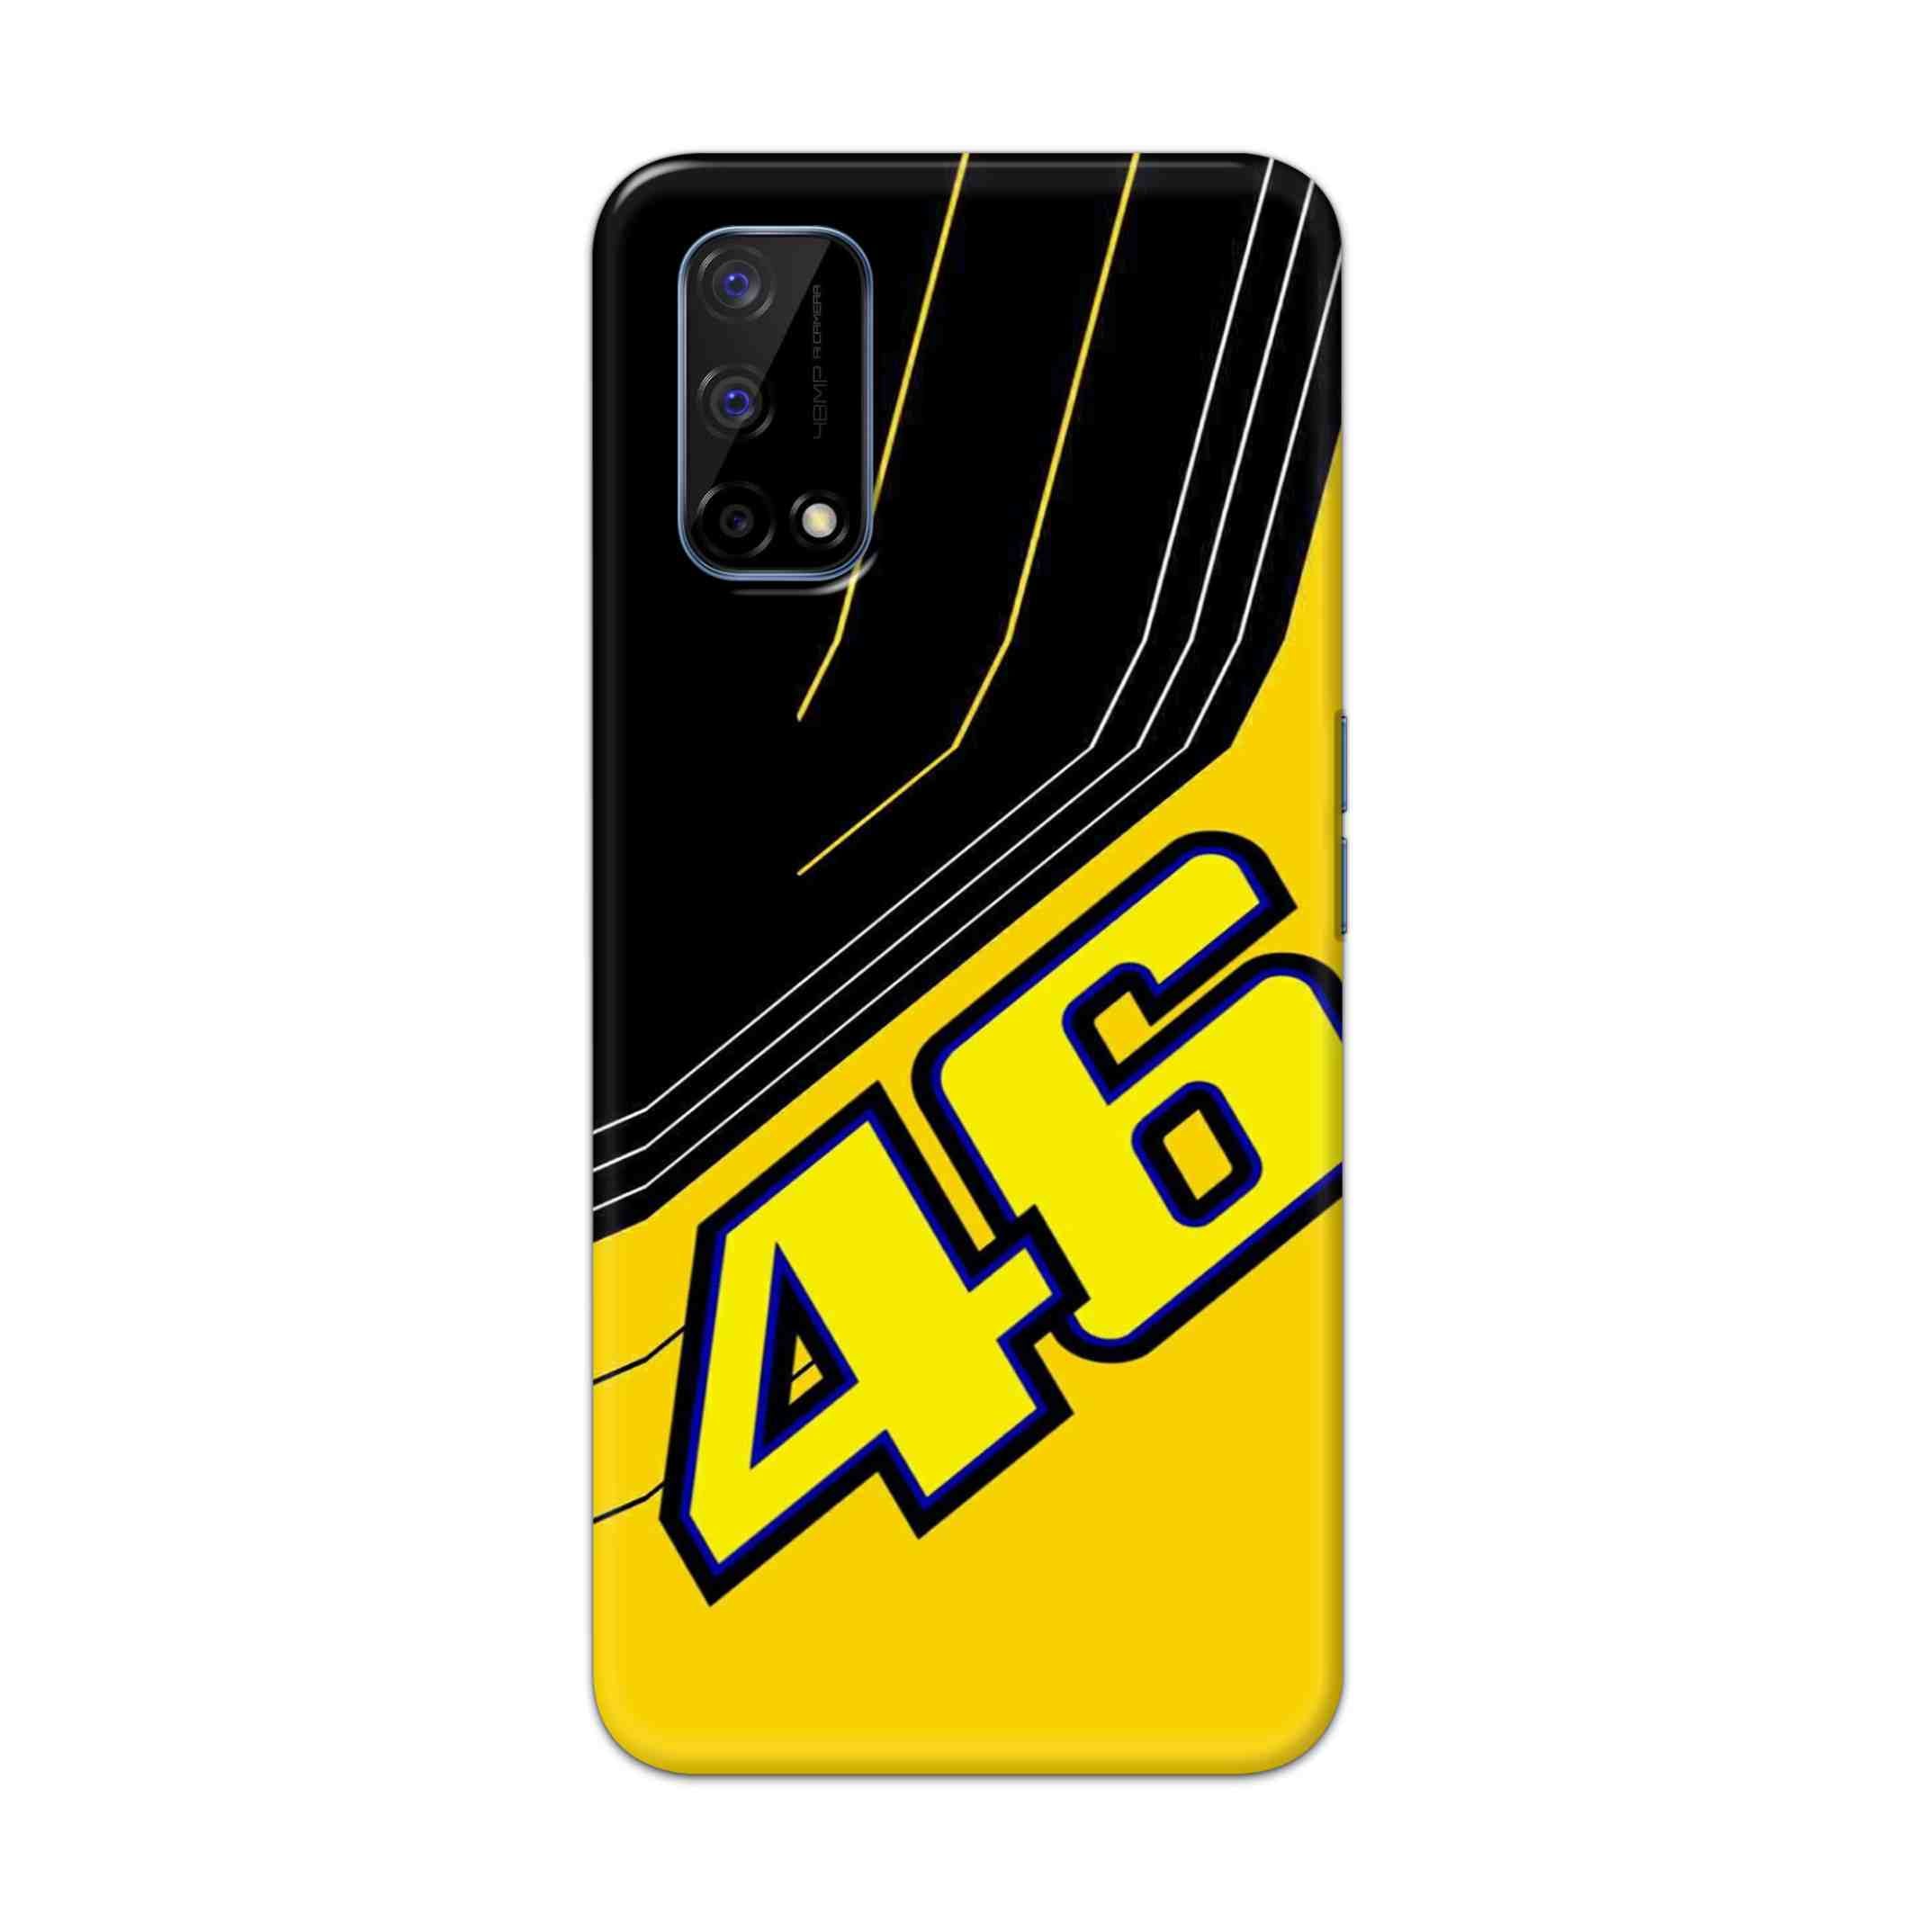 Buy 46 Hard Back Mobile Phone Case Cover For Realme Narzo 30 Pro Online